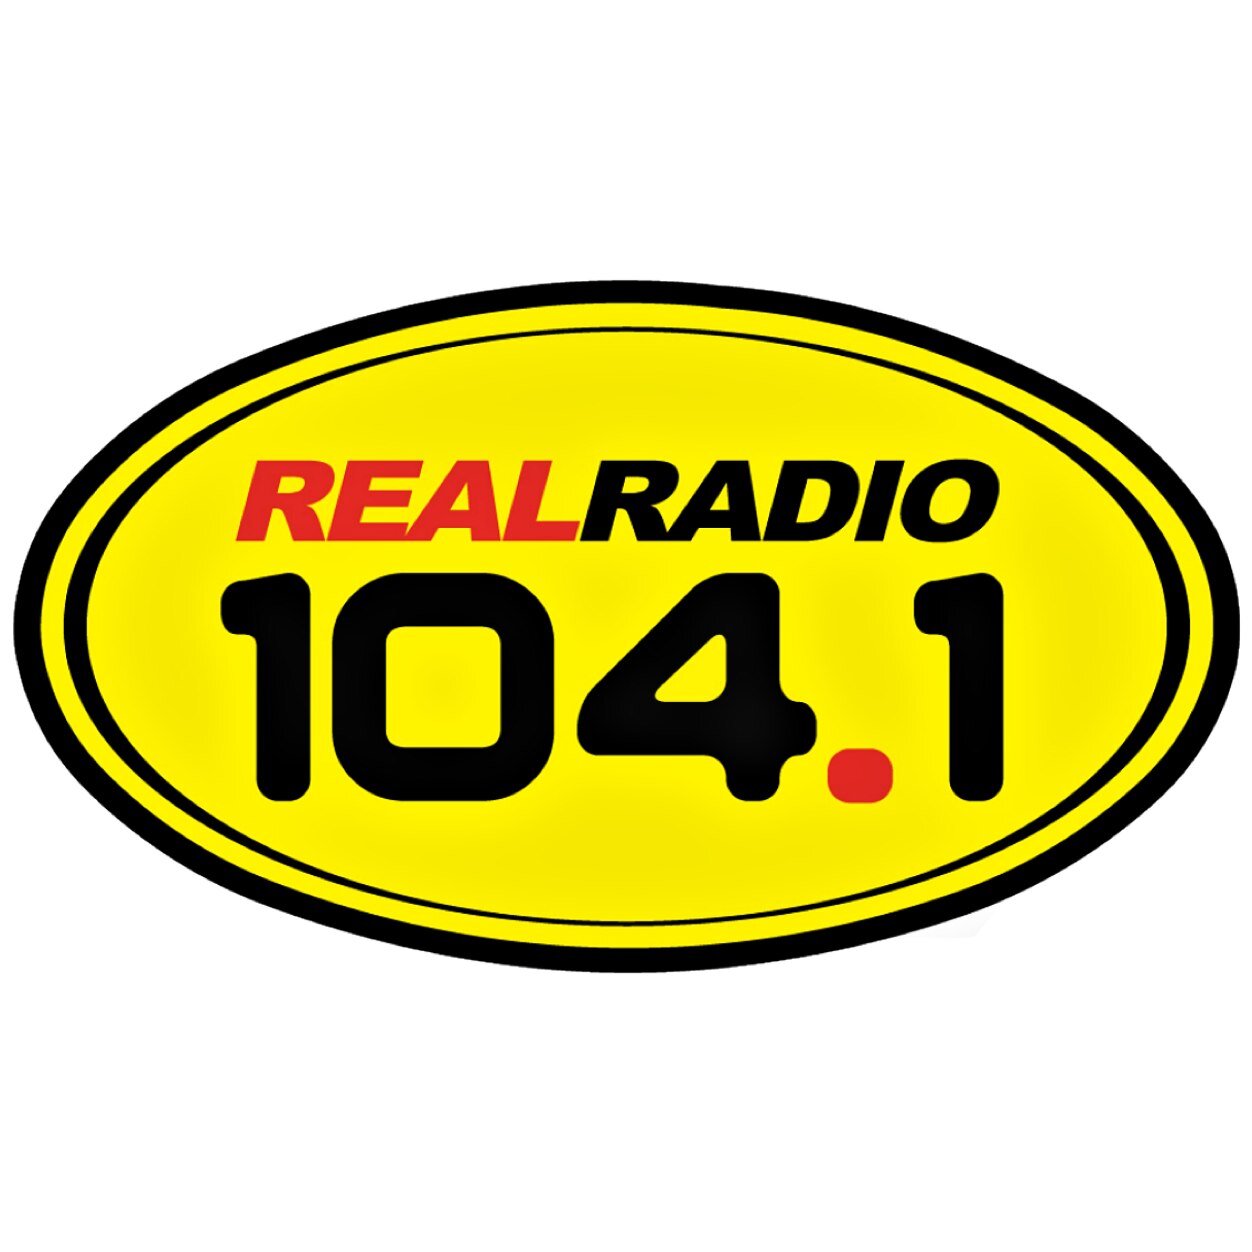 Real Radio has been a wonderful partner in this charity endeavor with A Gift For Teaching and OffLeaseOnly!